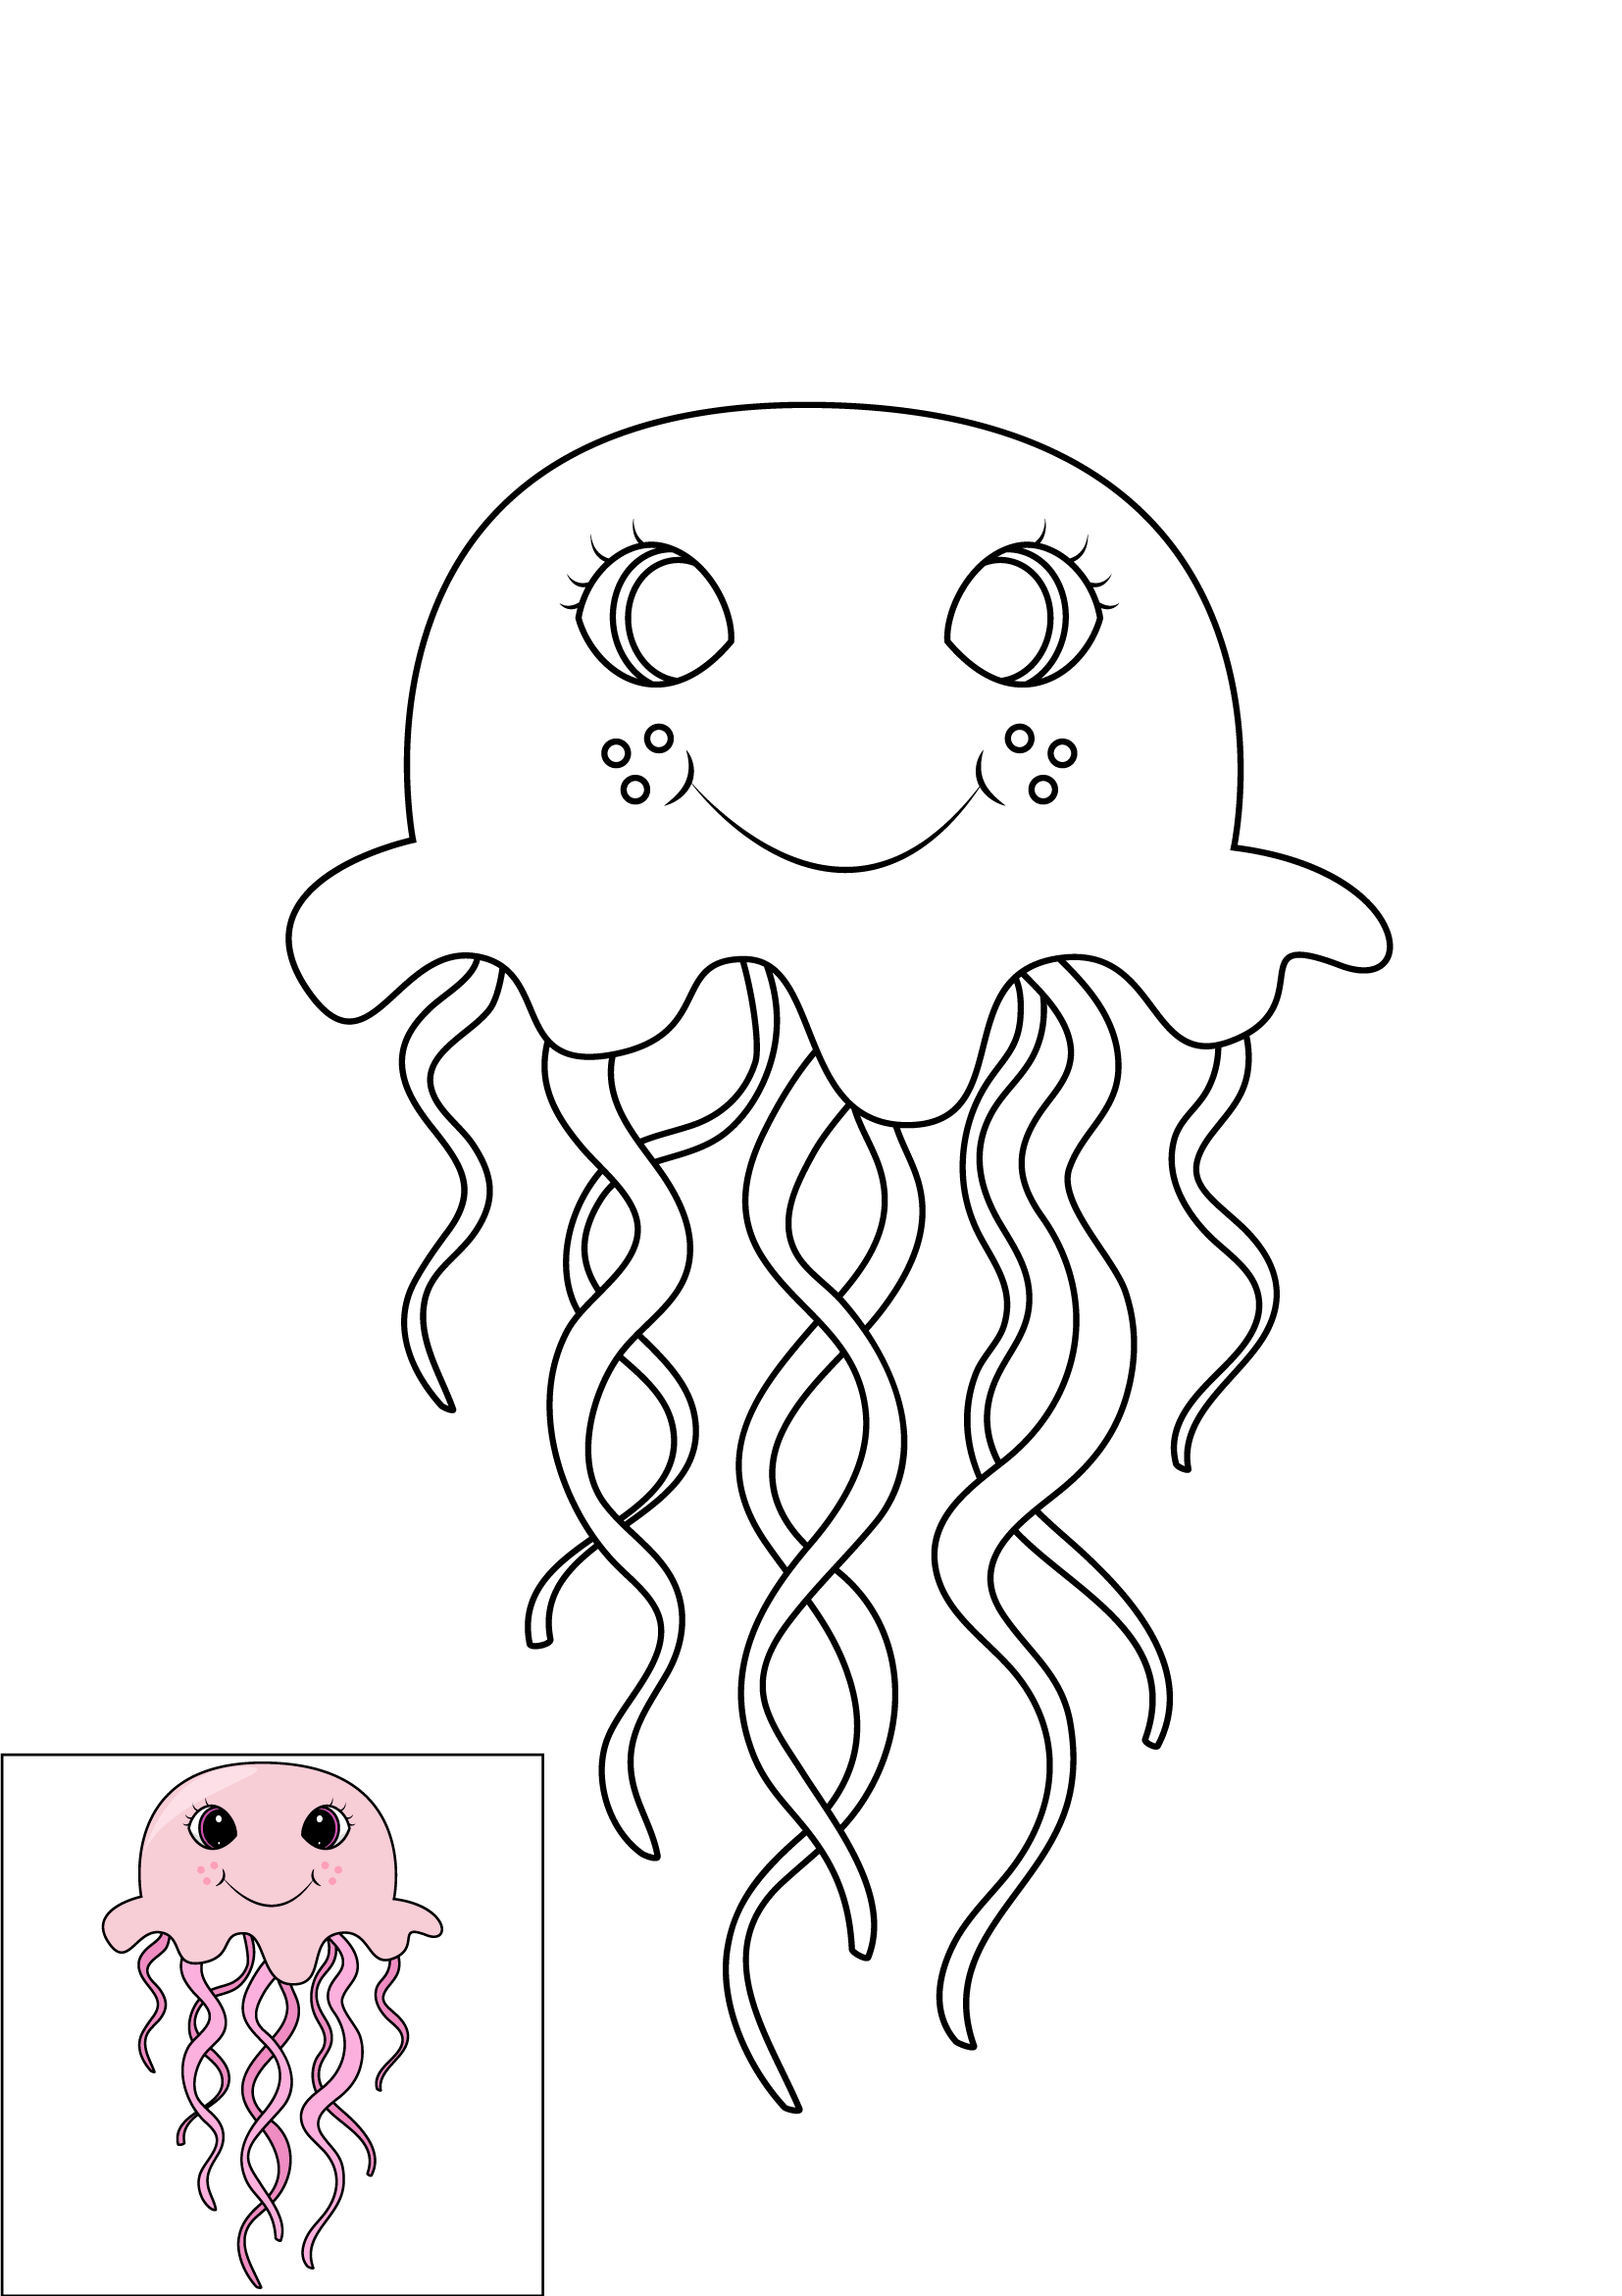 How to Draw A Jellyfish Step by Step Printable Color